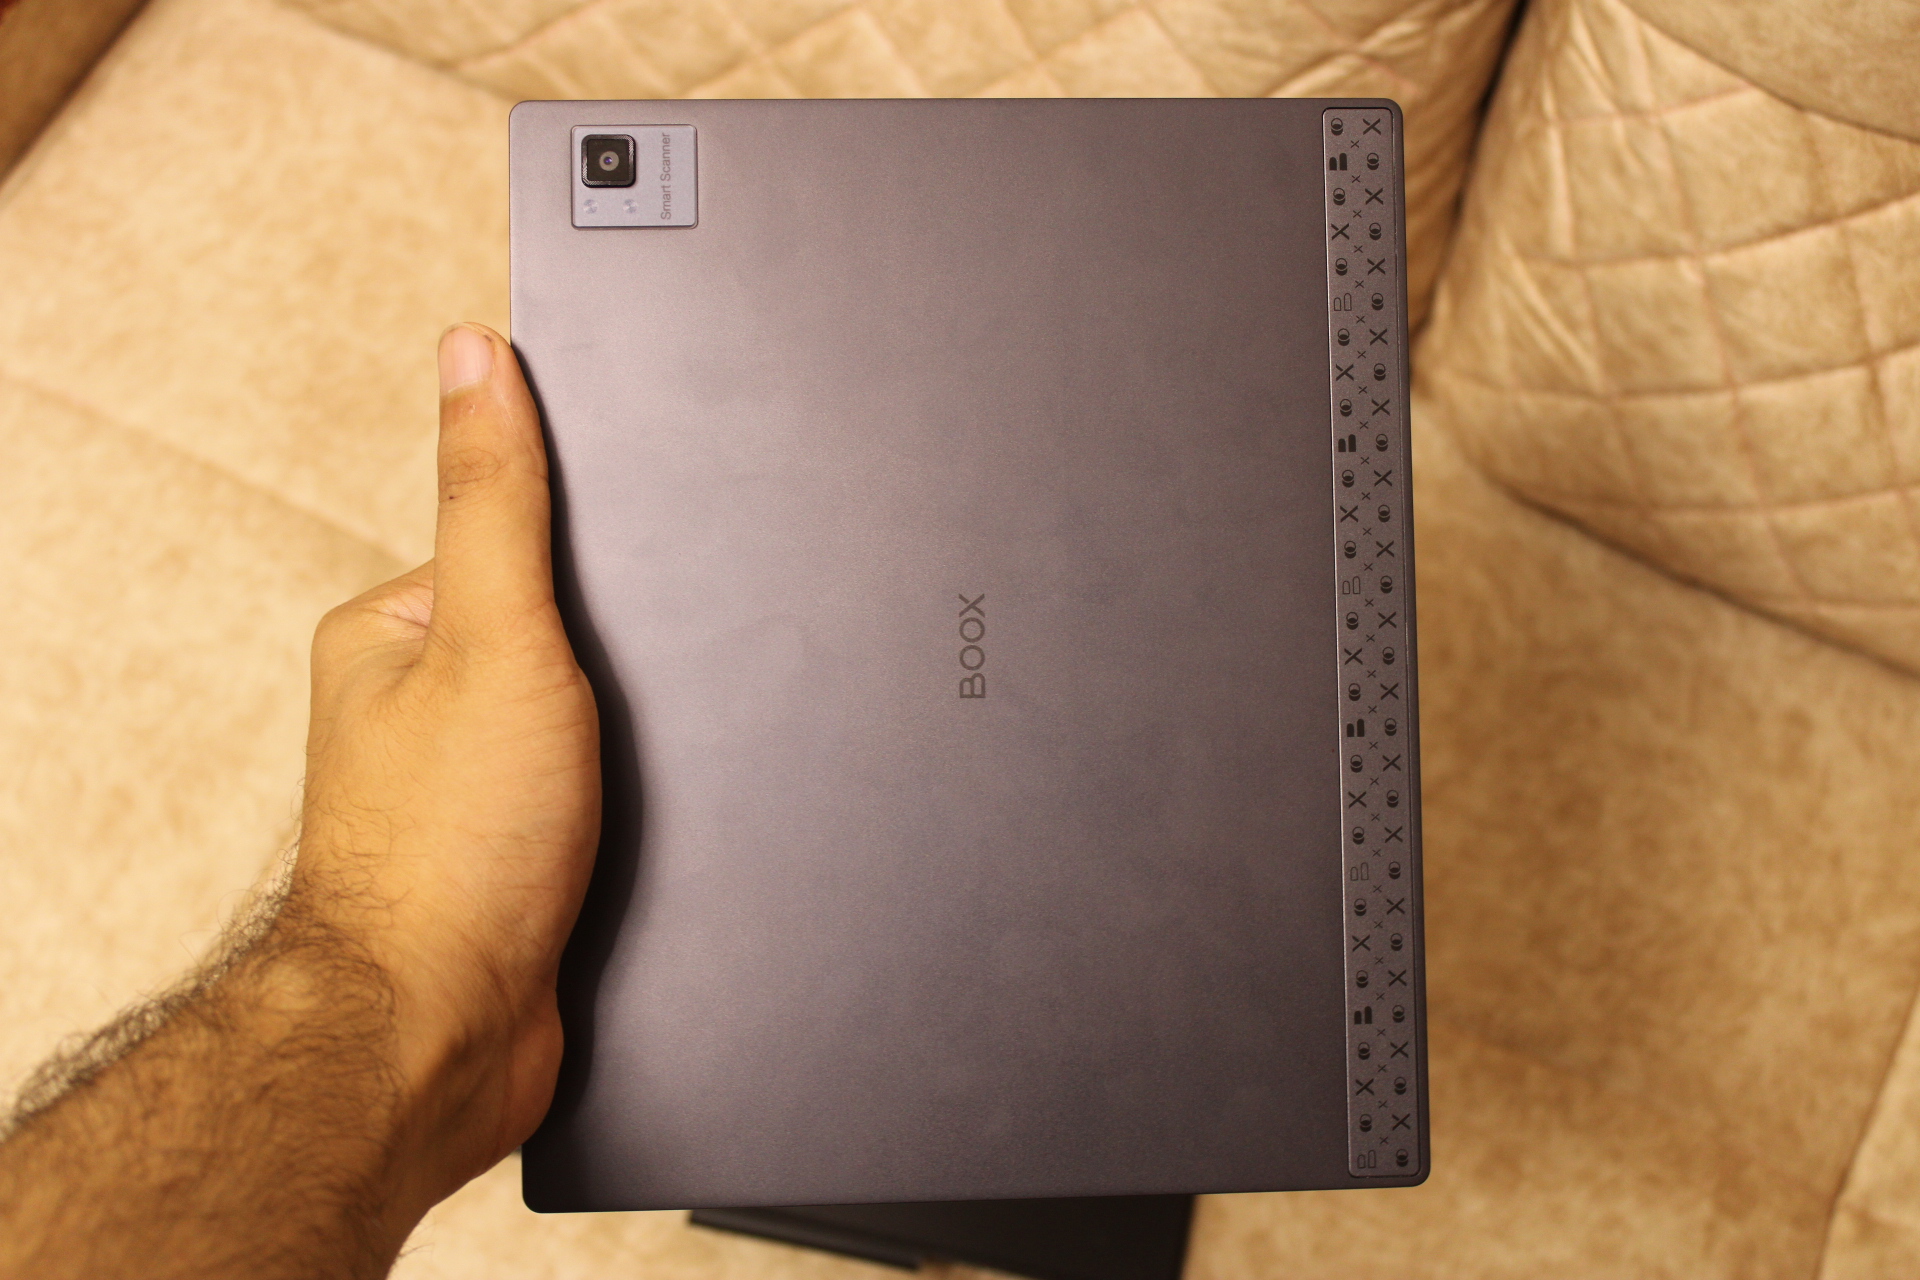 Onyx Boox Tab Ultra review: an Android tablet unlike any other